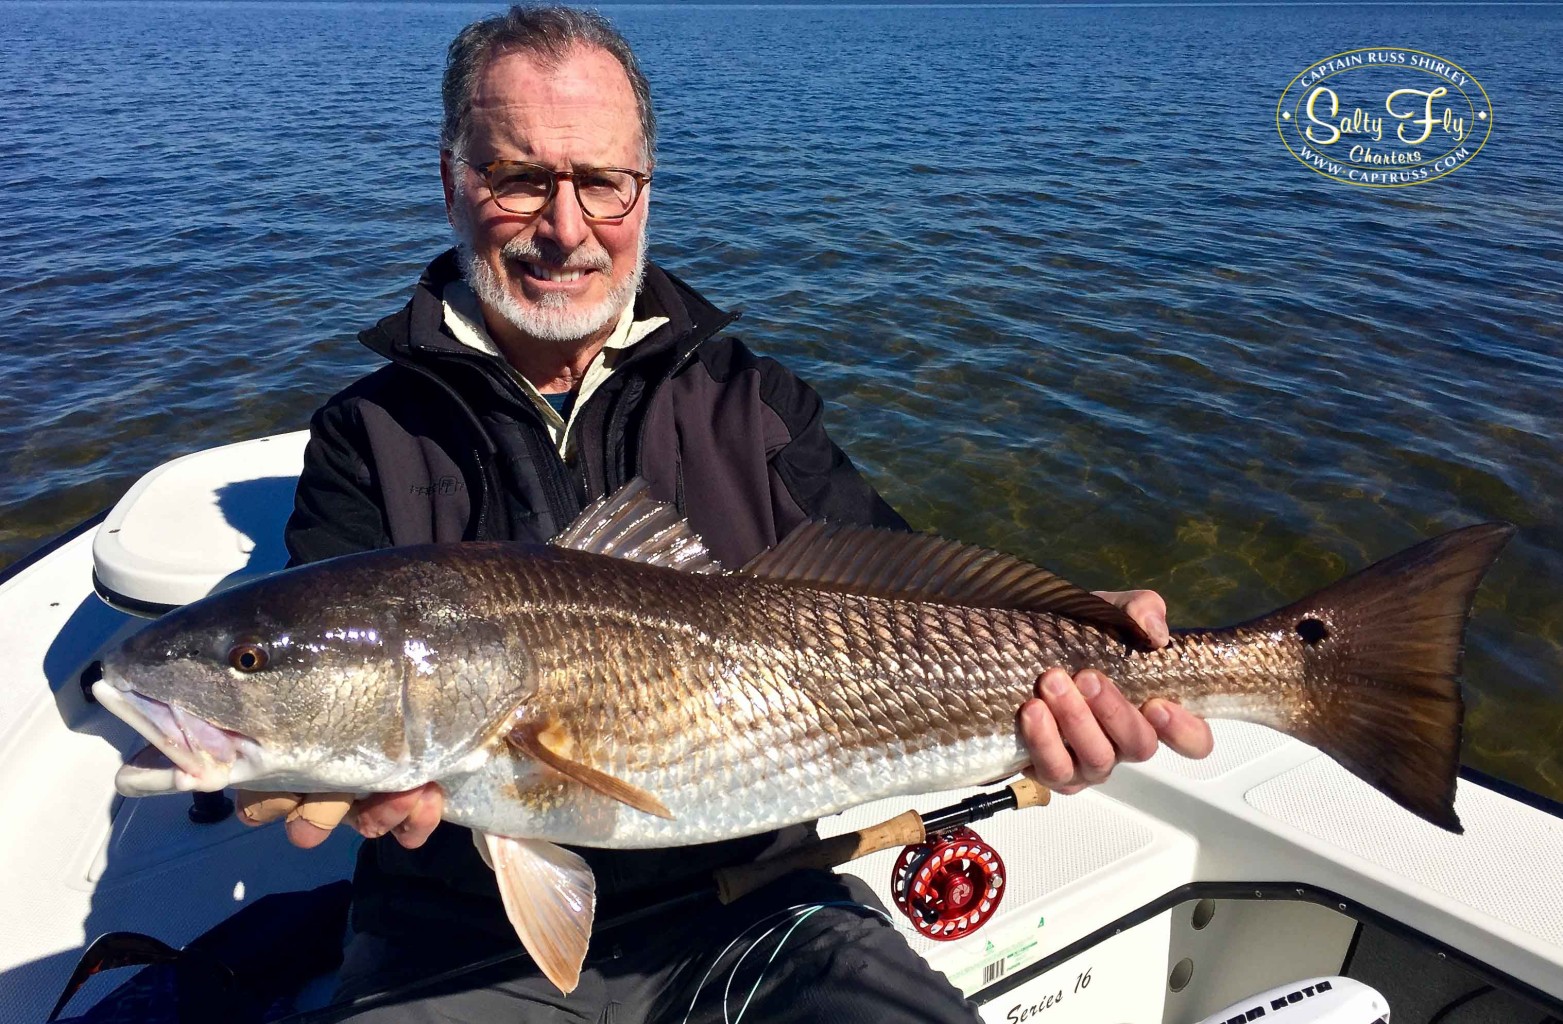 Paul Pezza with his largest Redfish on fly fishing Tampa Bay with Captain Russ Shirley of Salty Fly Charters.